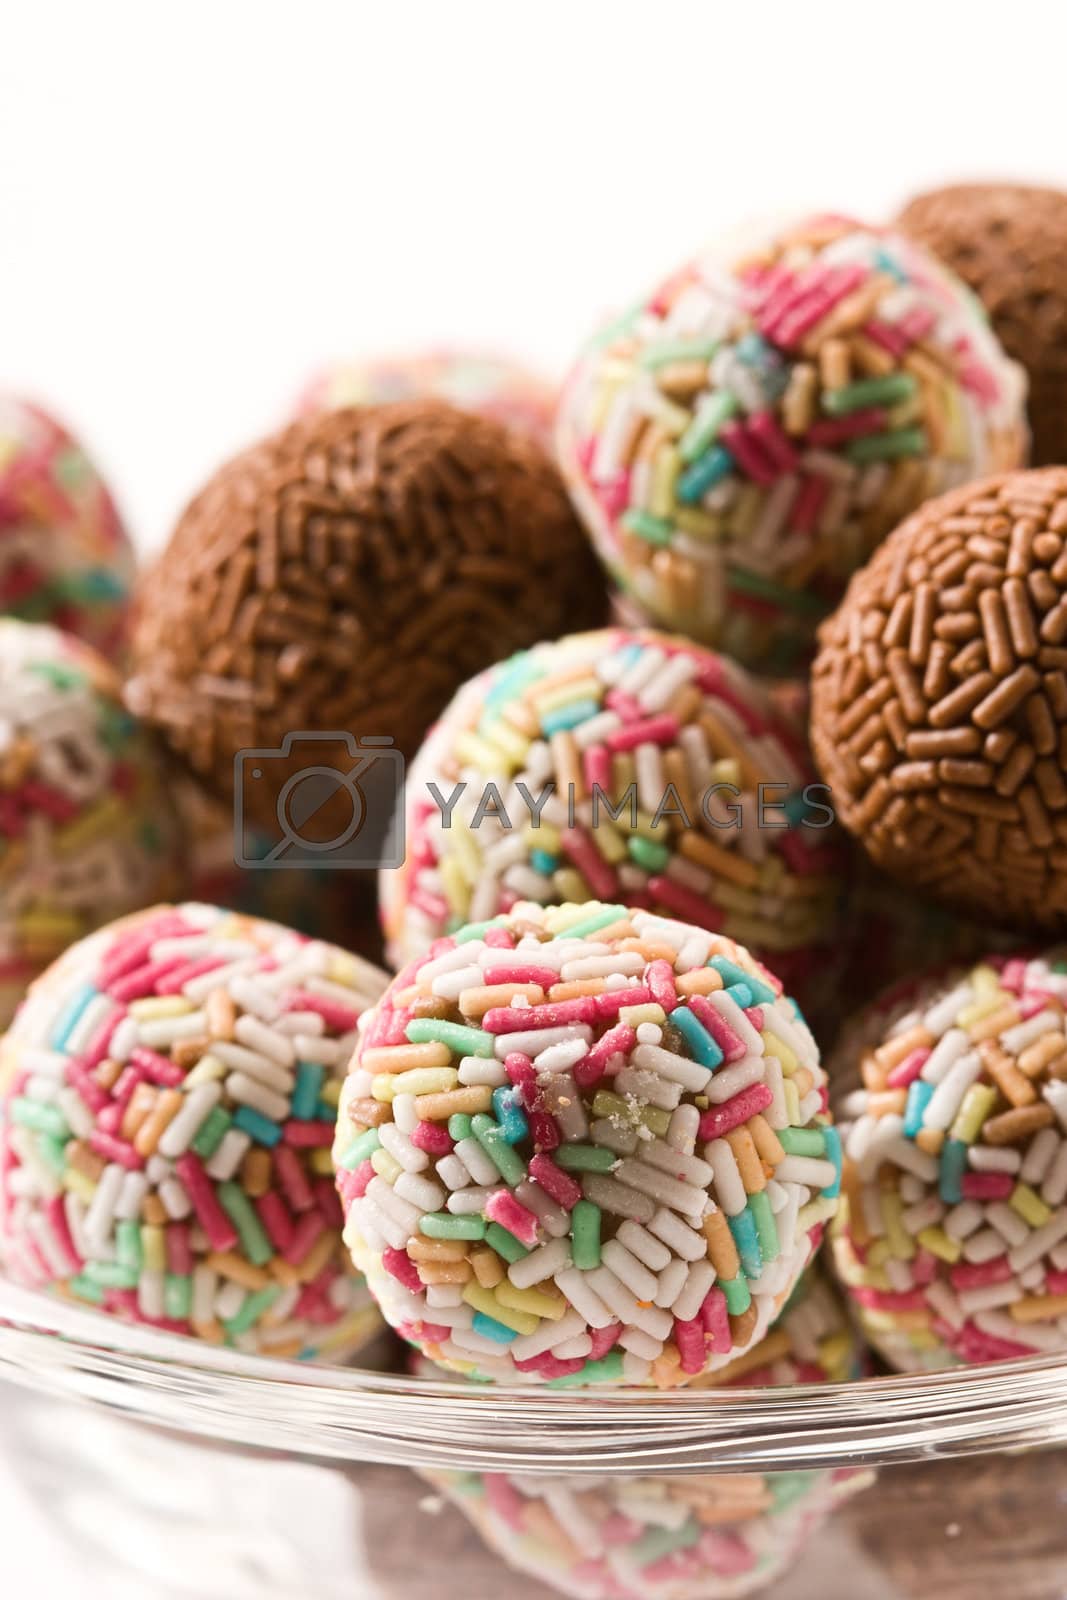 Royalty free image of sugar candy by agg